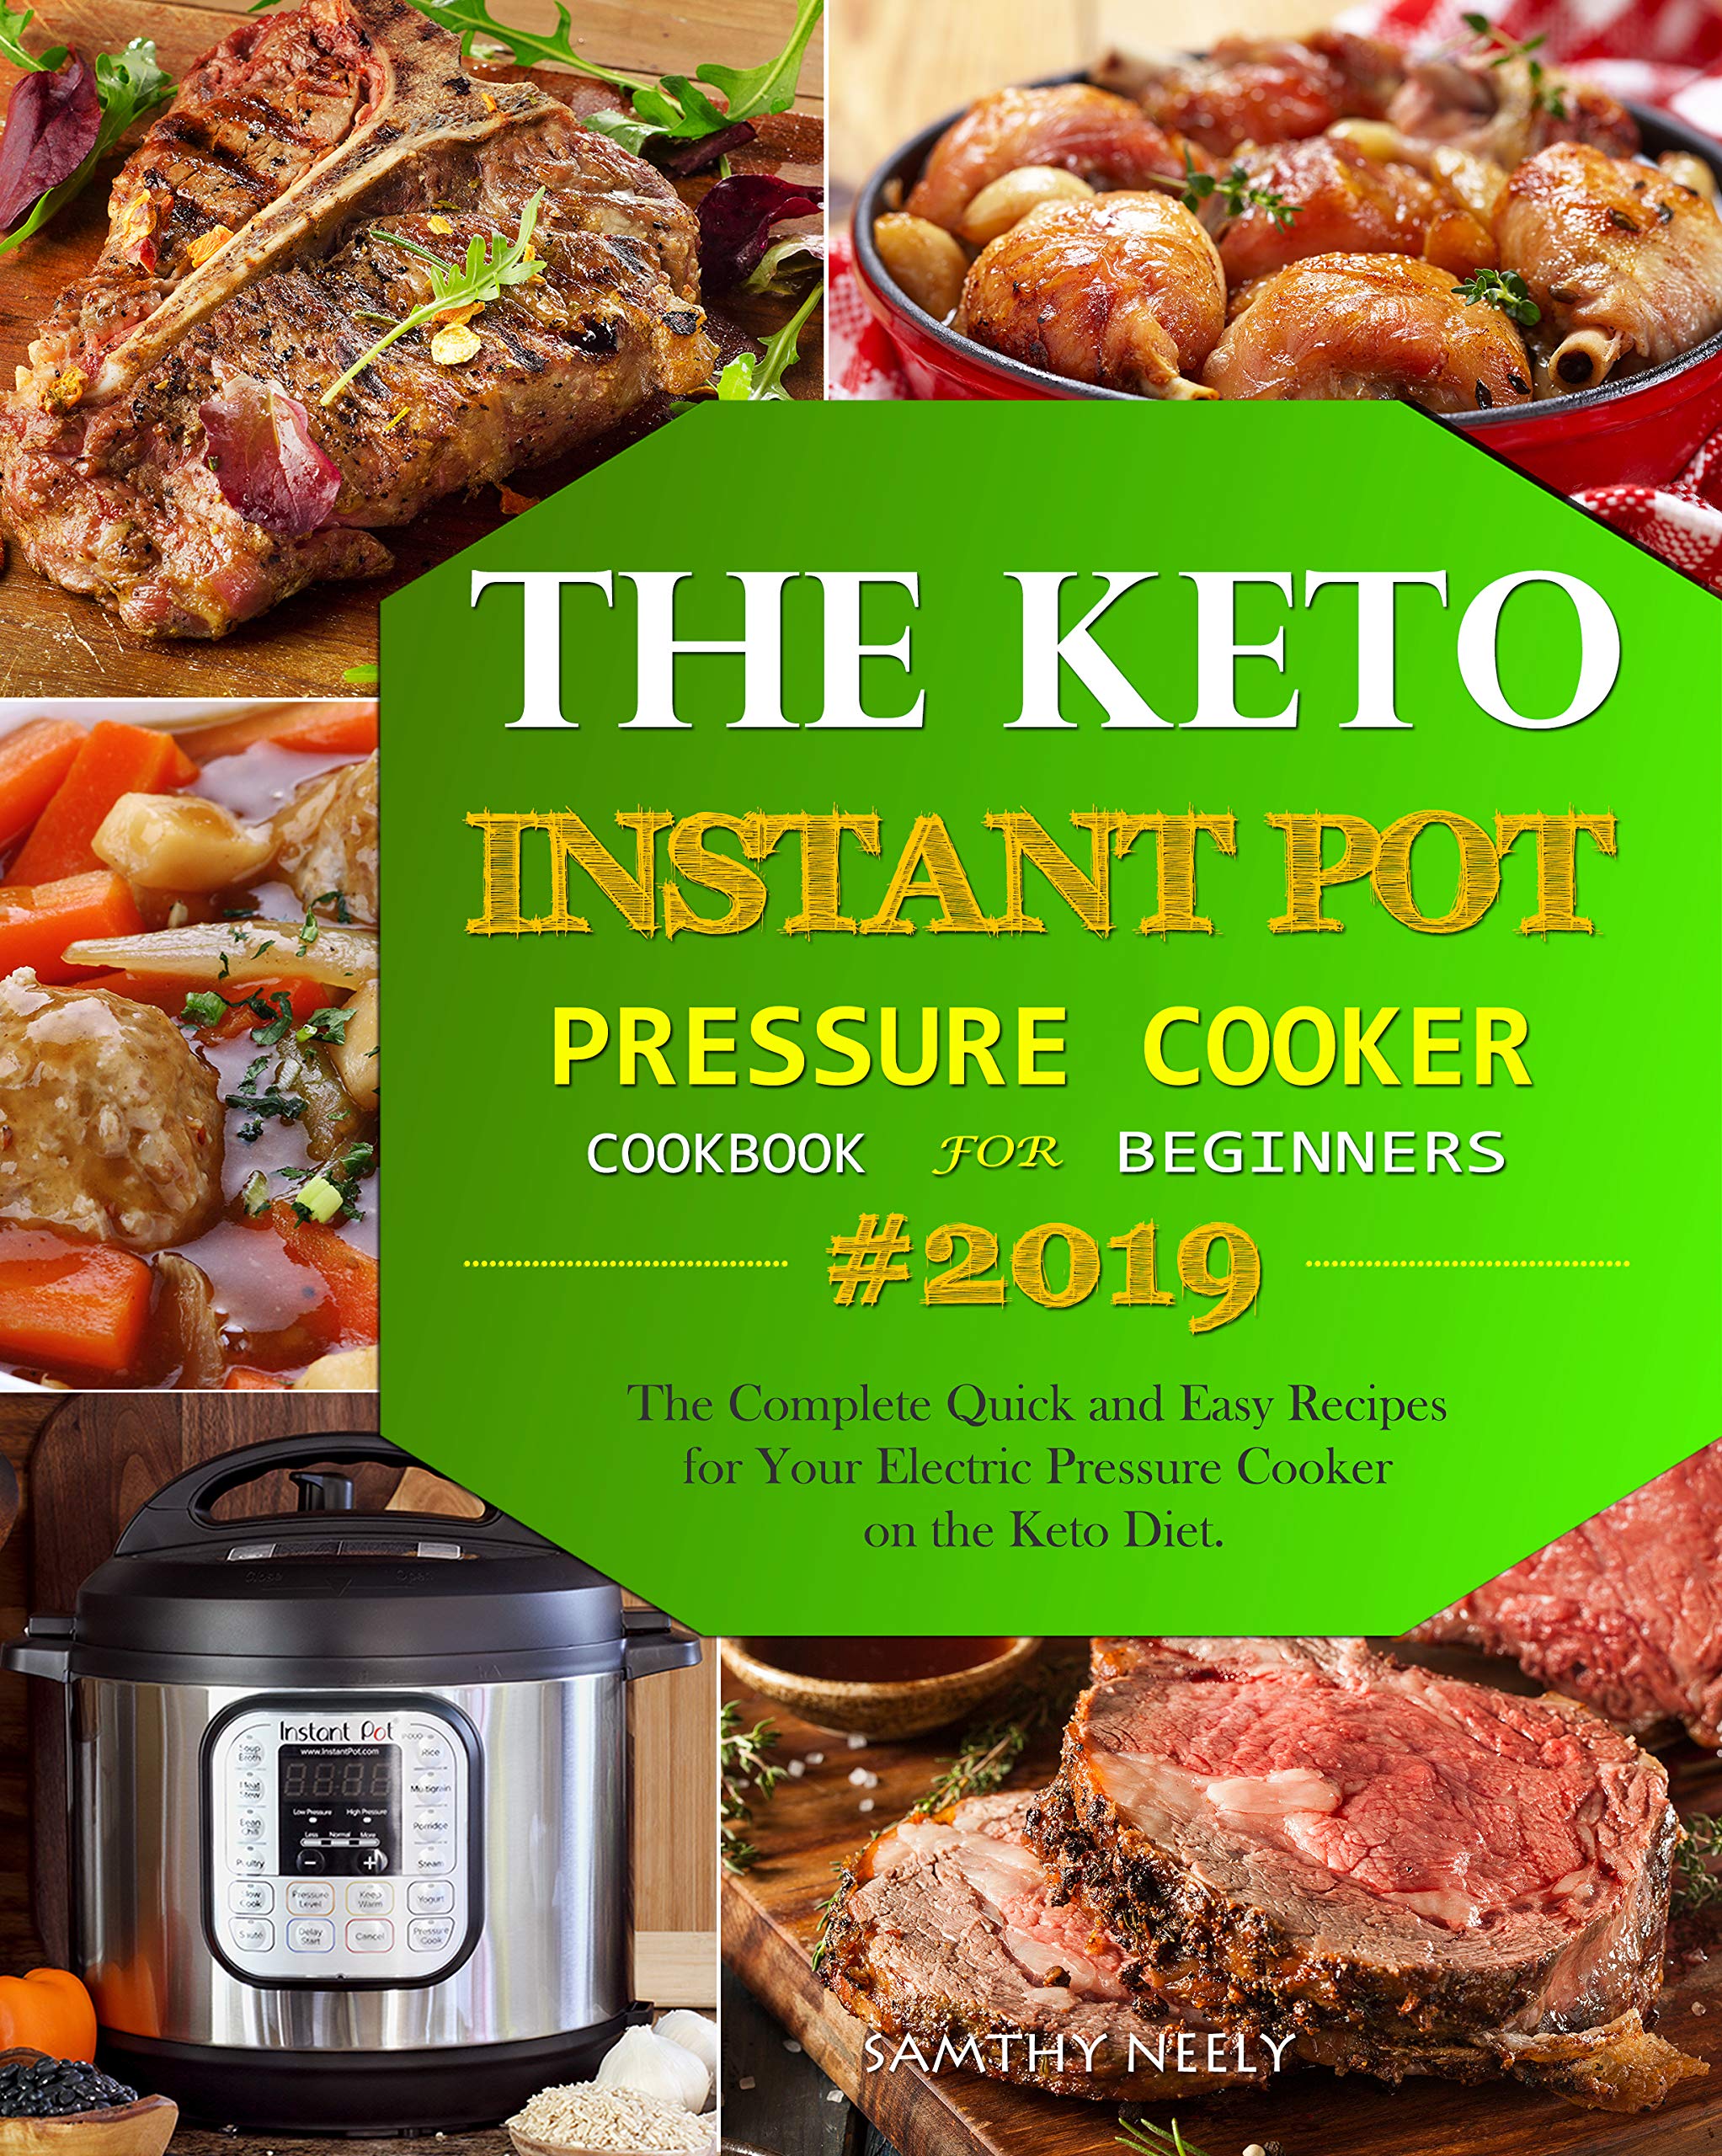 Book Cover The Keto Instant Pot Pressure Cooker Cookbook For Beginners: The Complete Quick and Easy Recipes for Your Electric Pressure Cooker on the Keto Diet.